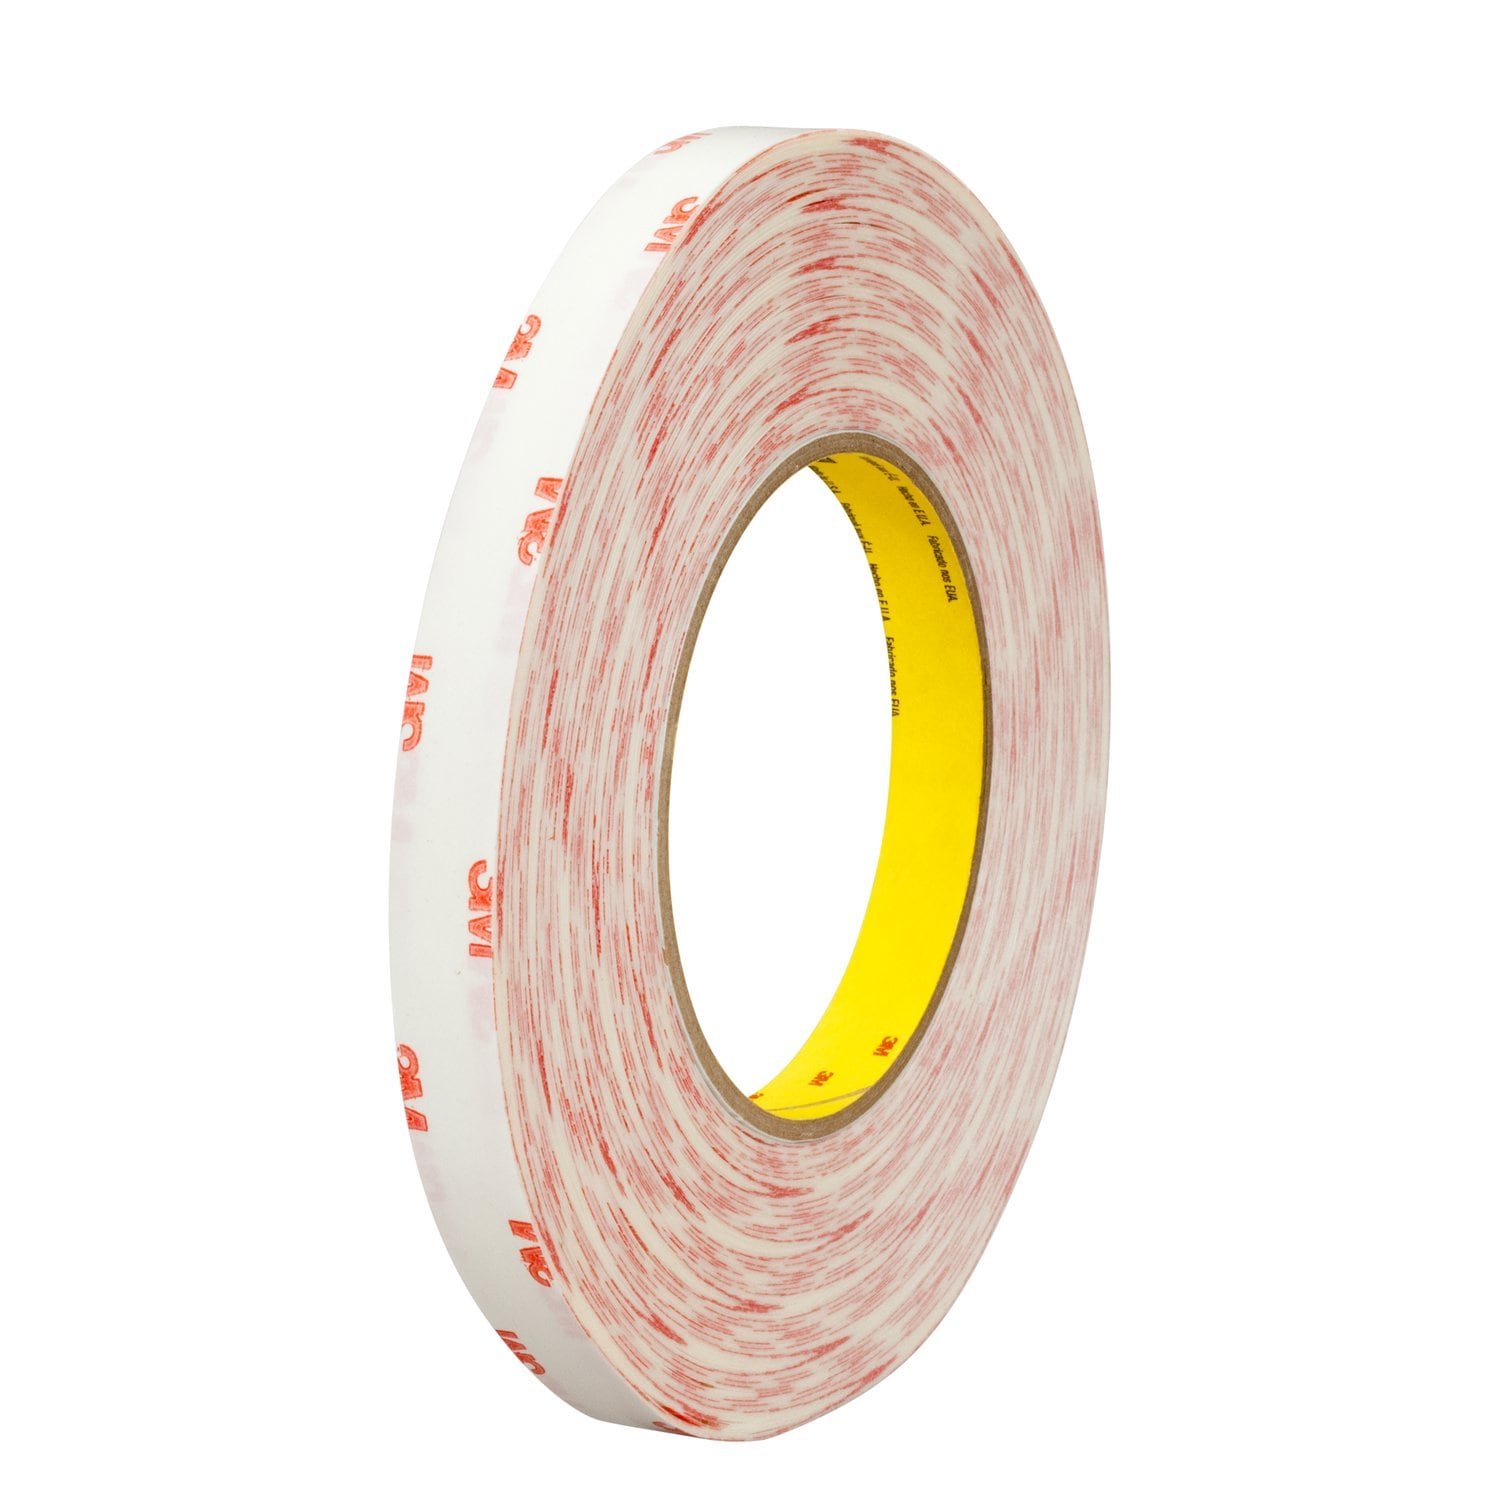 7100012208 - 3M Double Coated Tissue Tape 9456, Clear, 4 mil, Roll, Config